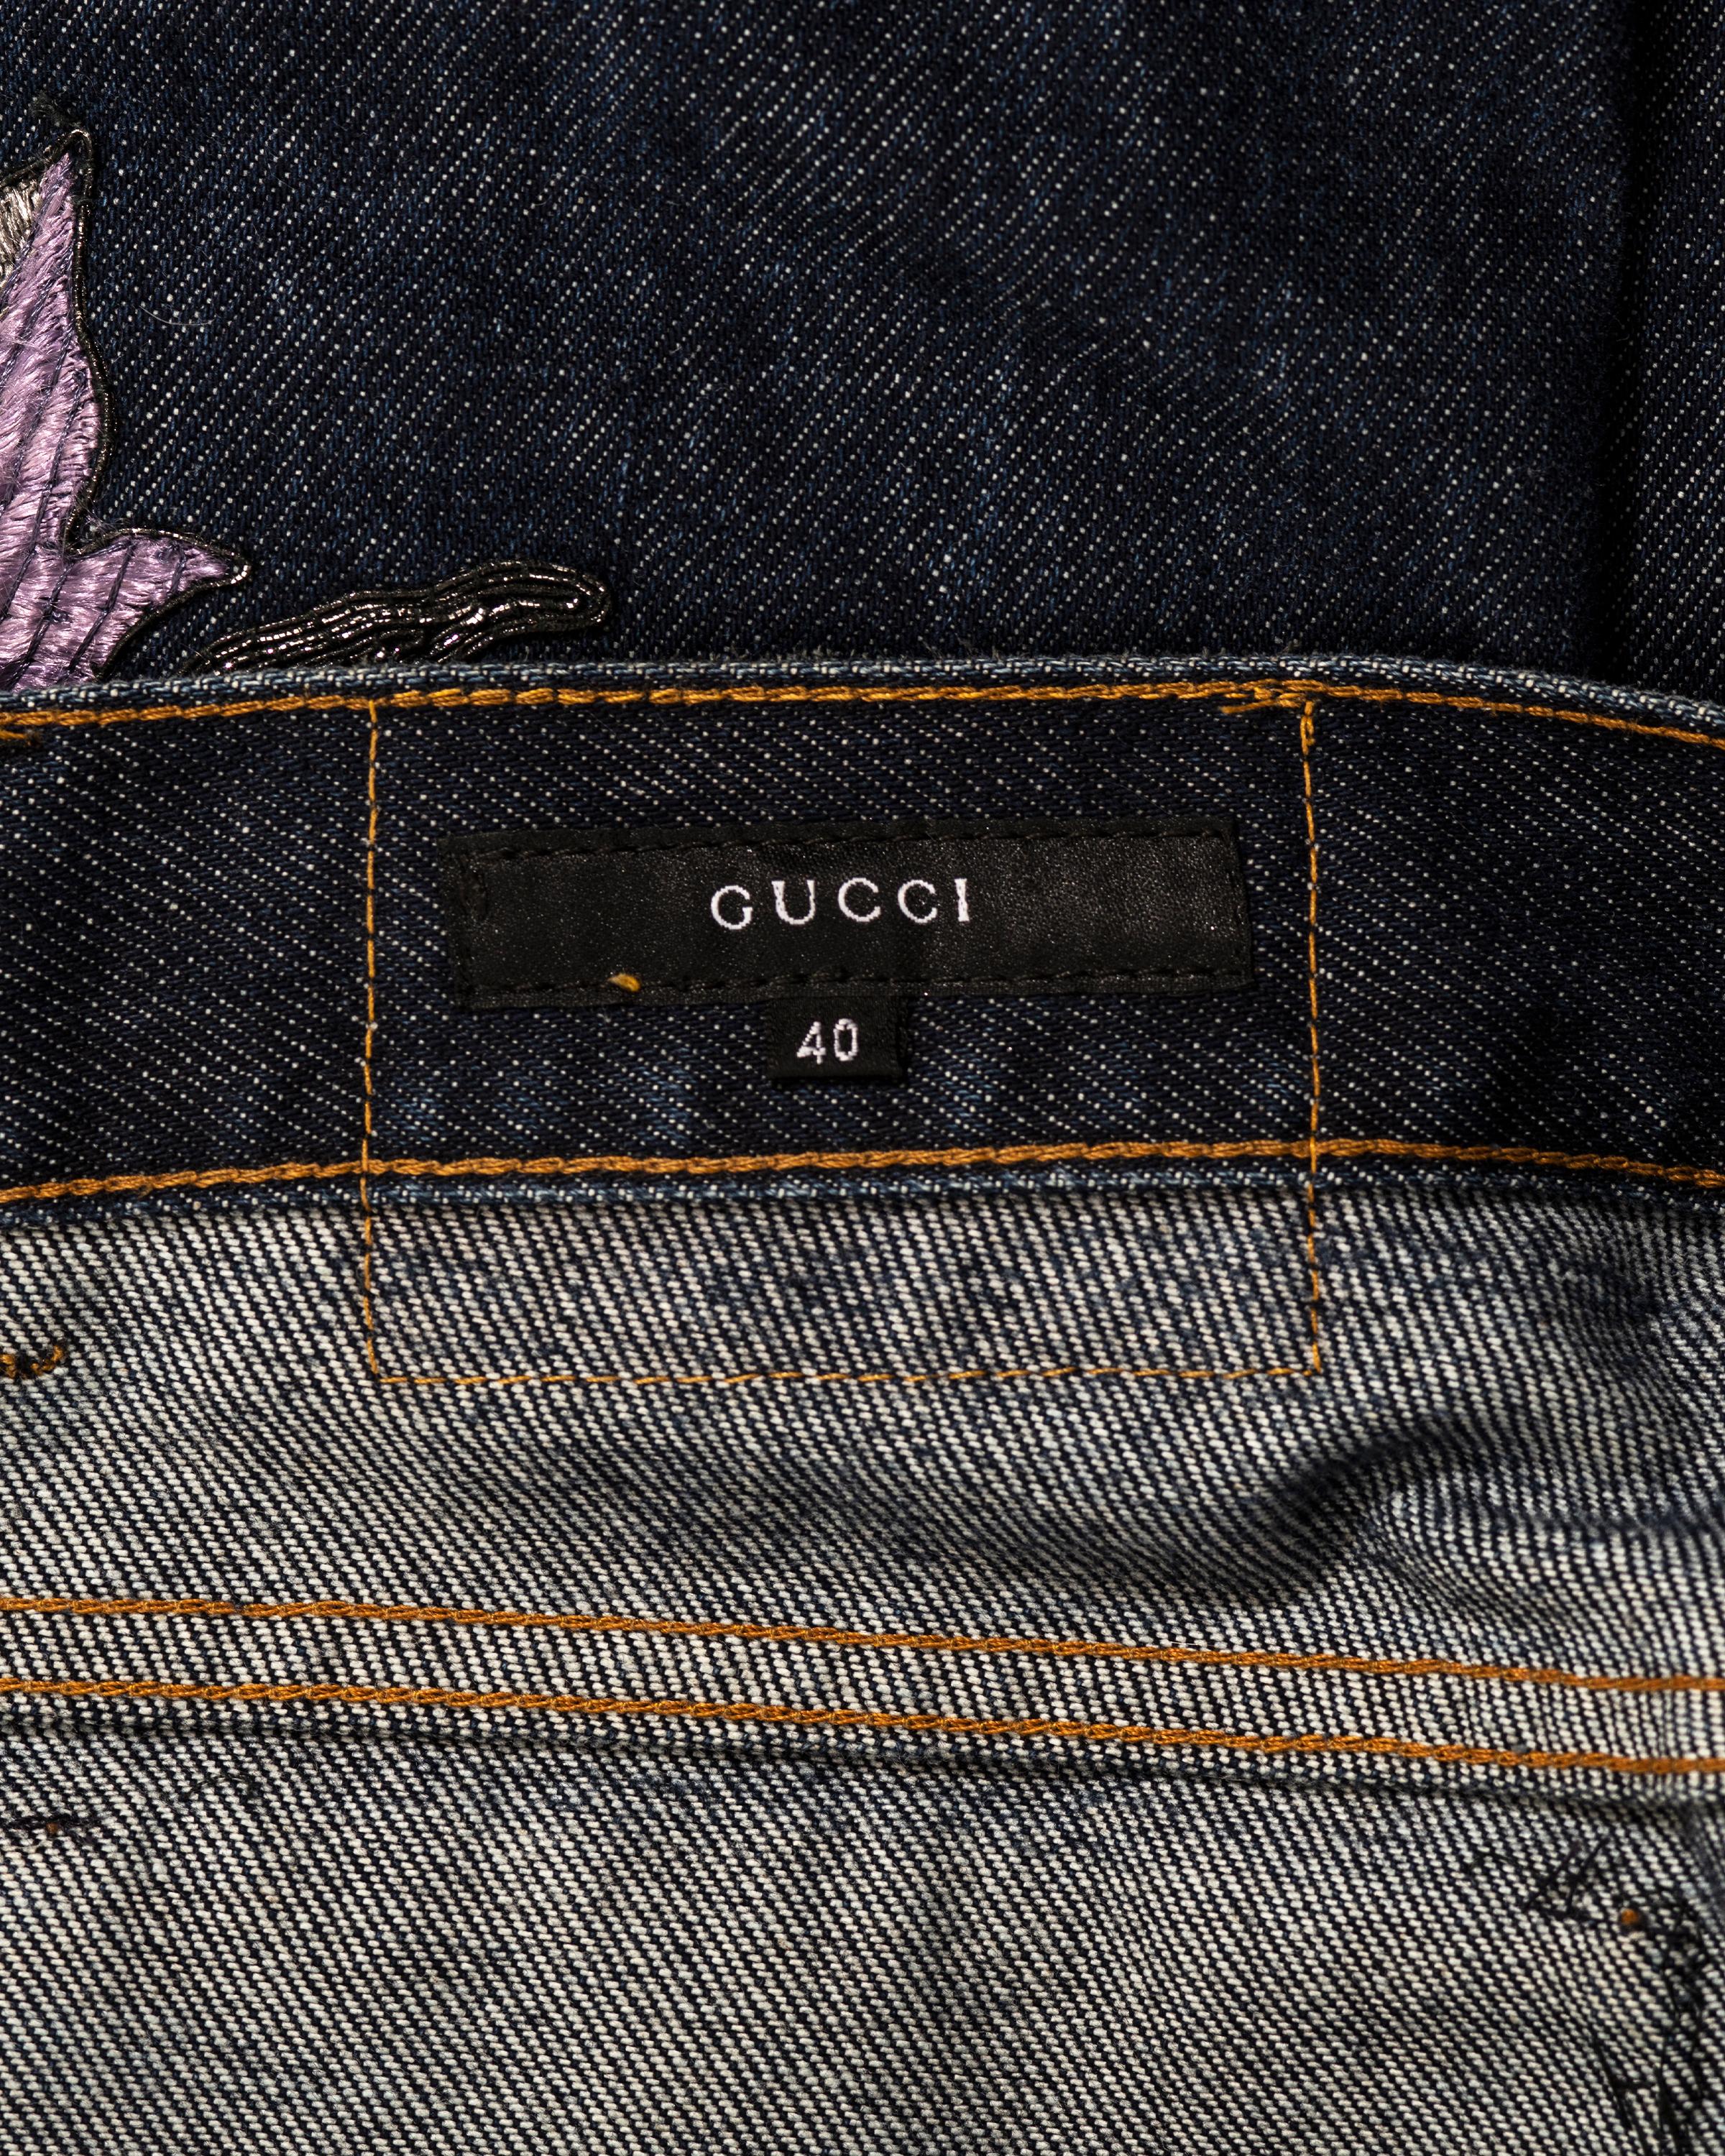 Gucci by Tom Ford denim jeans with floral embroidery, fw 1999 For Sale 1